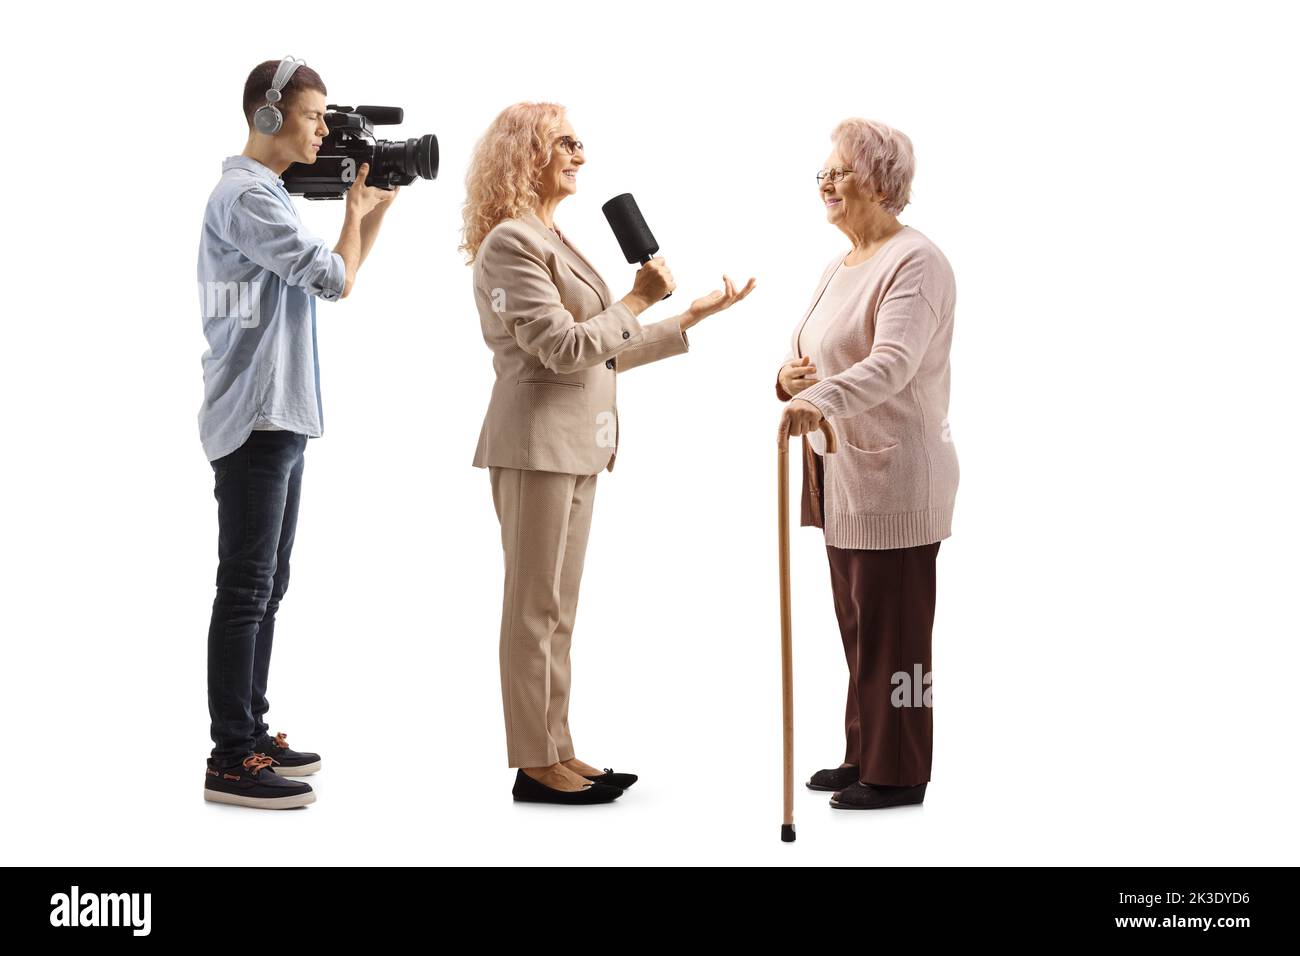 Female journalist interviewing an elderly woman and camera man filming isolated on white background Stock Photo